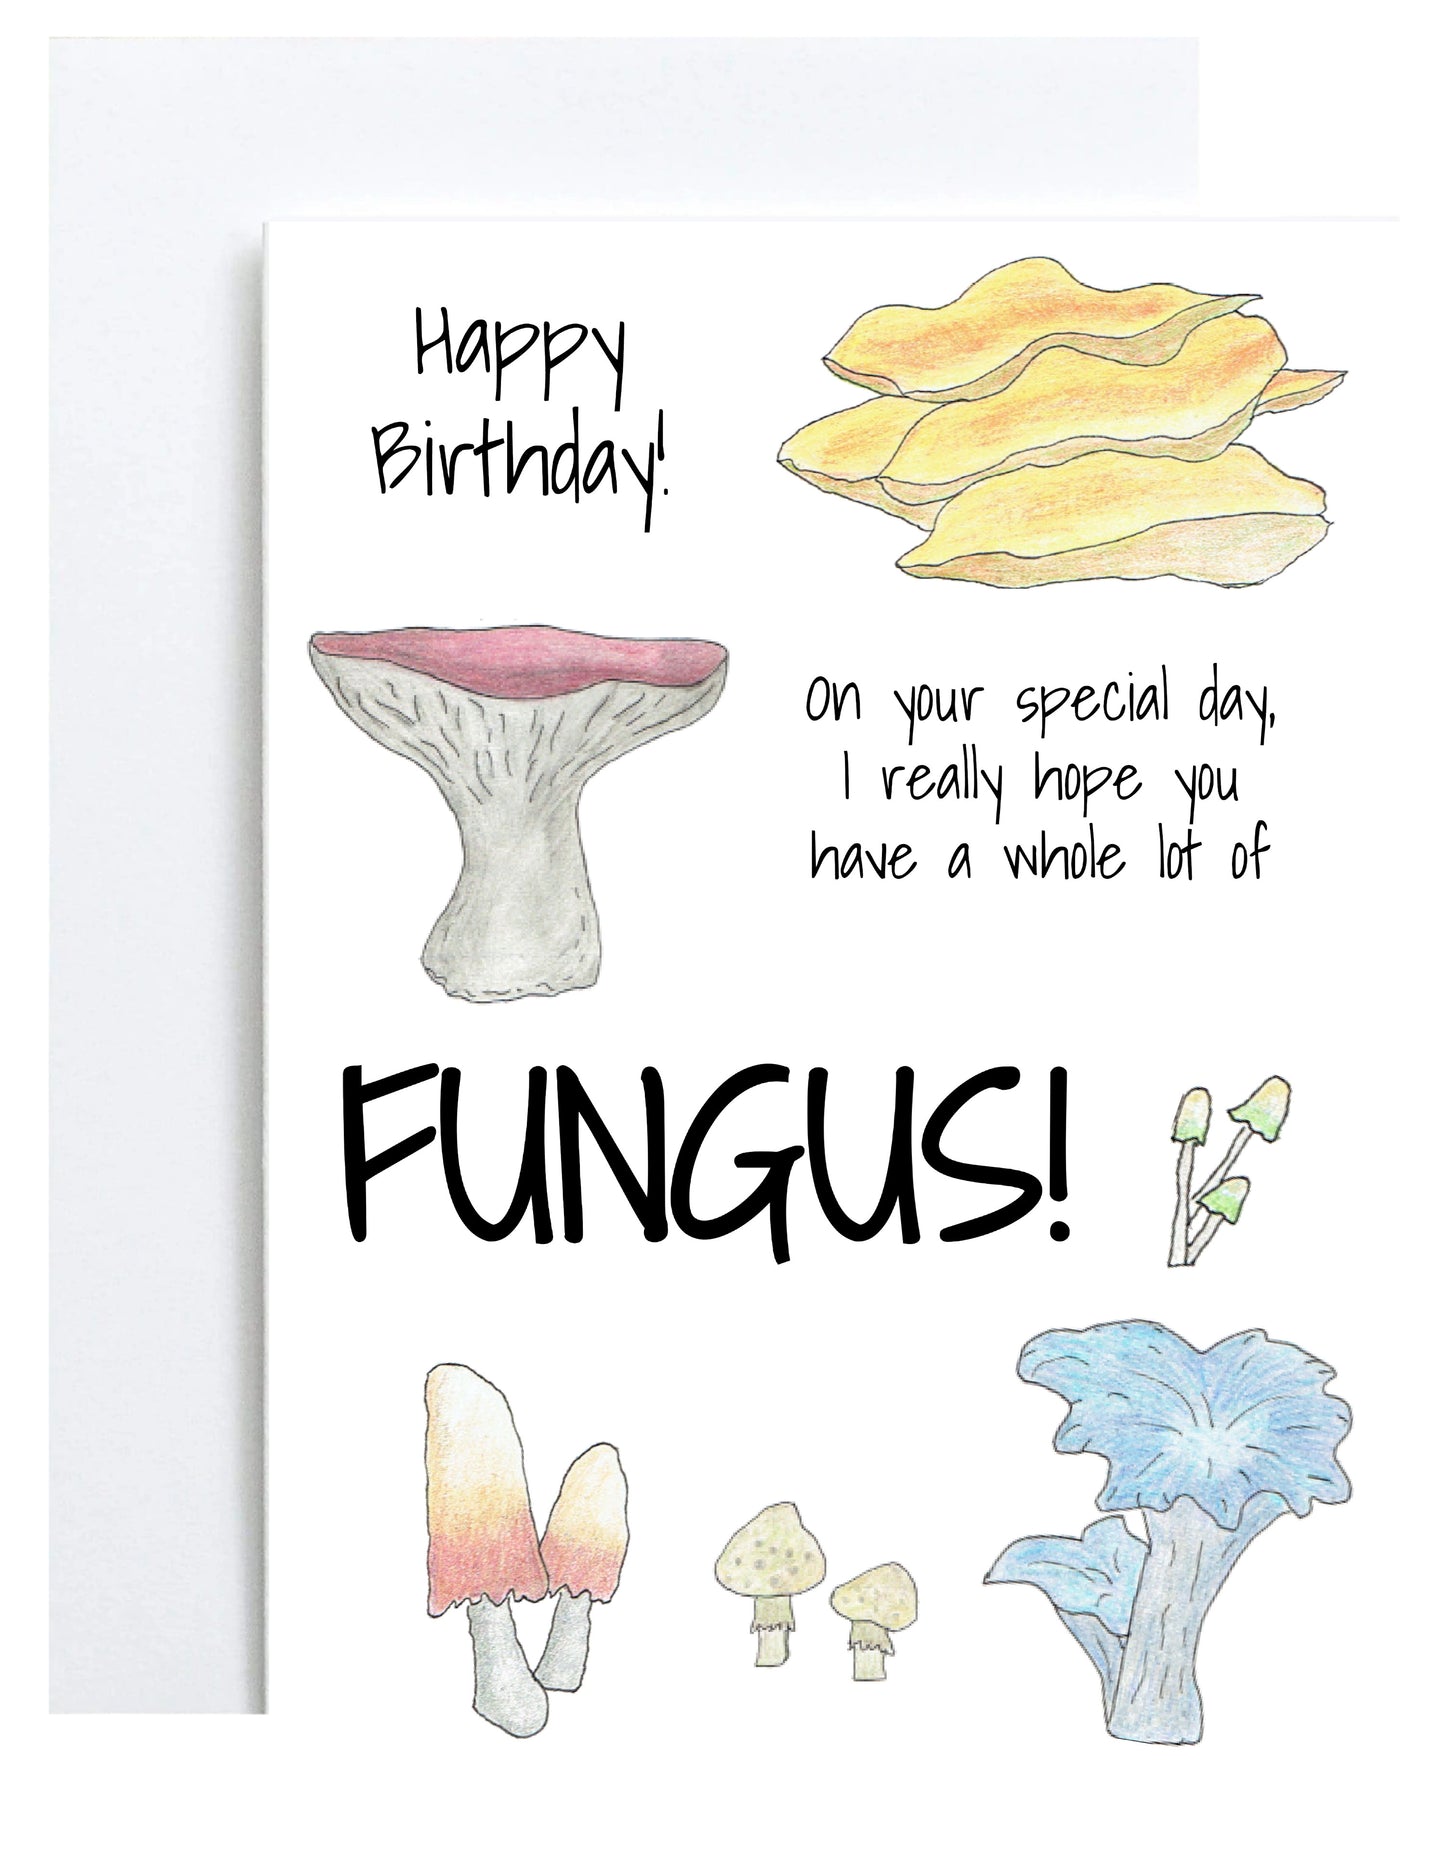 "Have a Whole Lot of Fungus!" Greeting Card (Birthday)